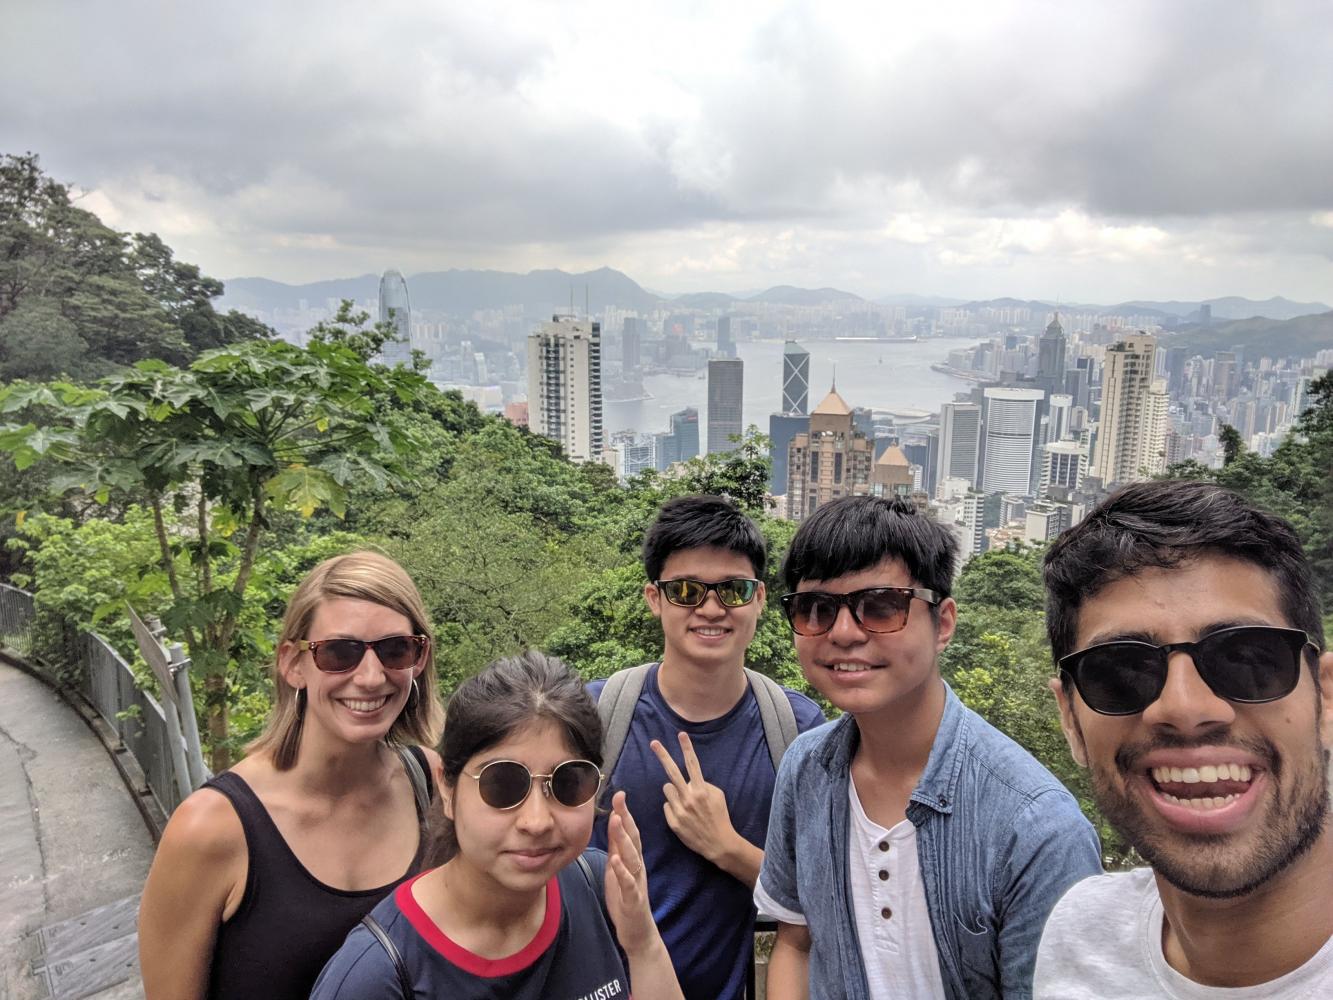 A group takes a selfie in front of the Hong Kong skyline